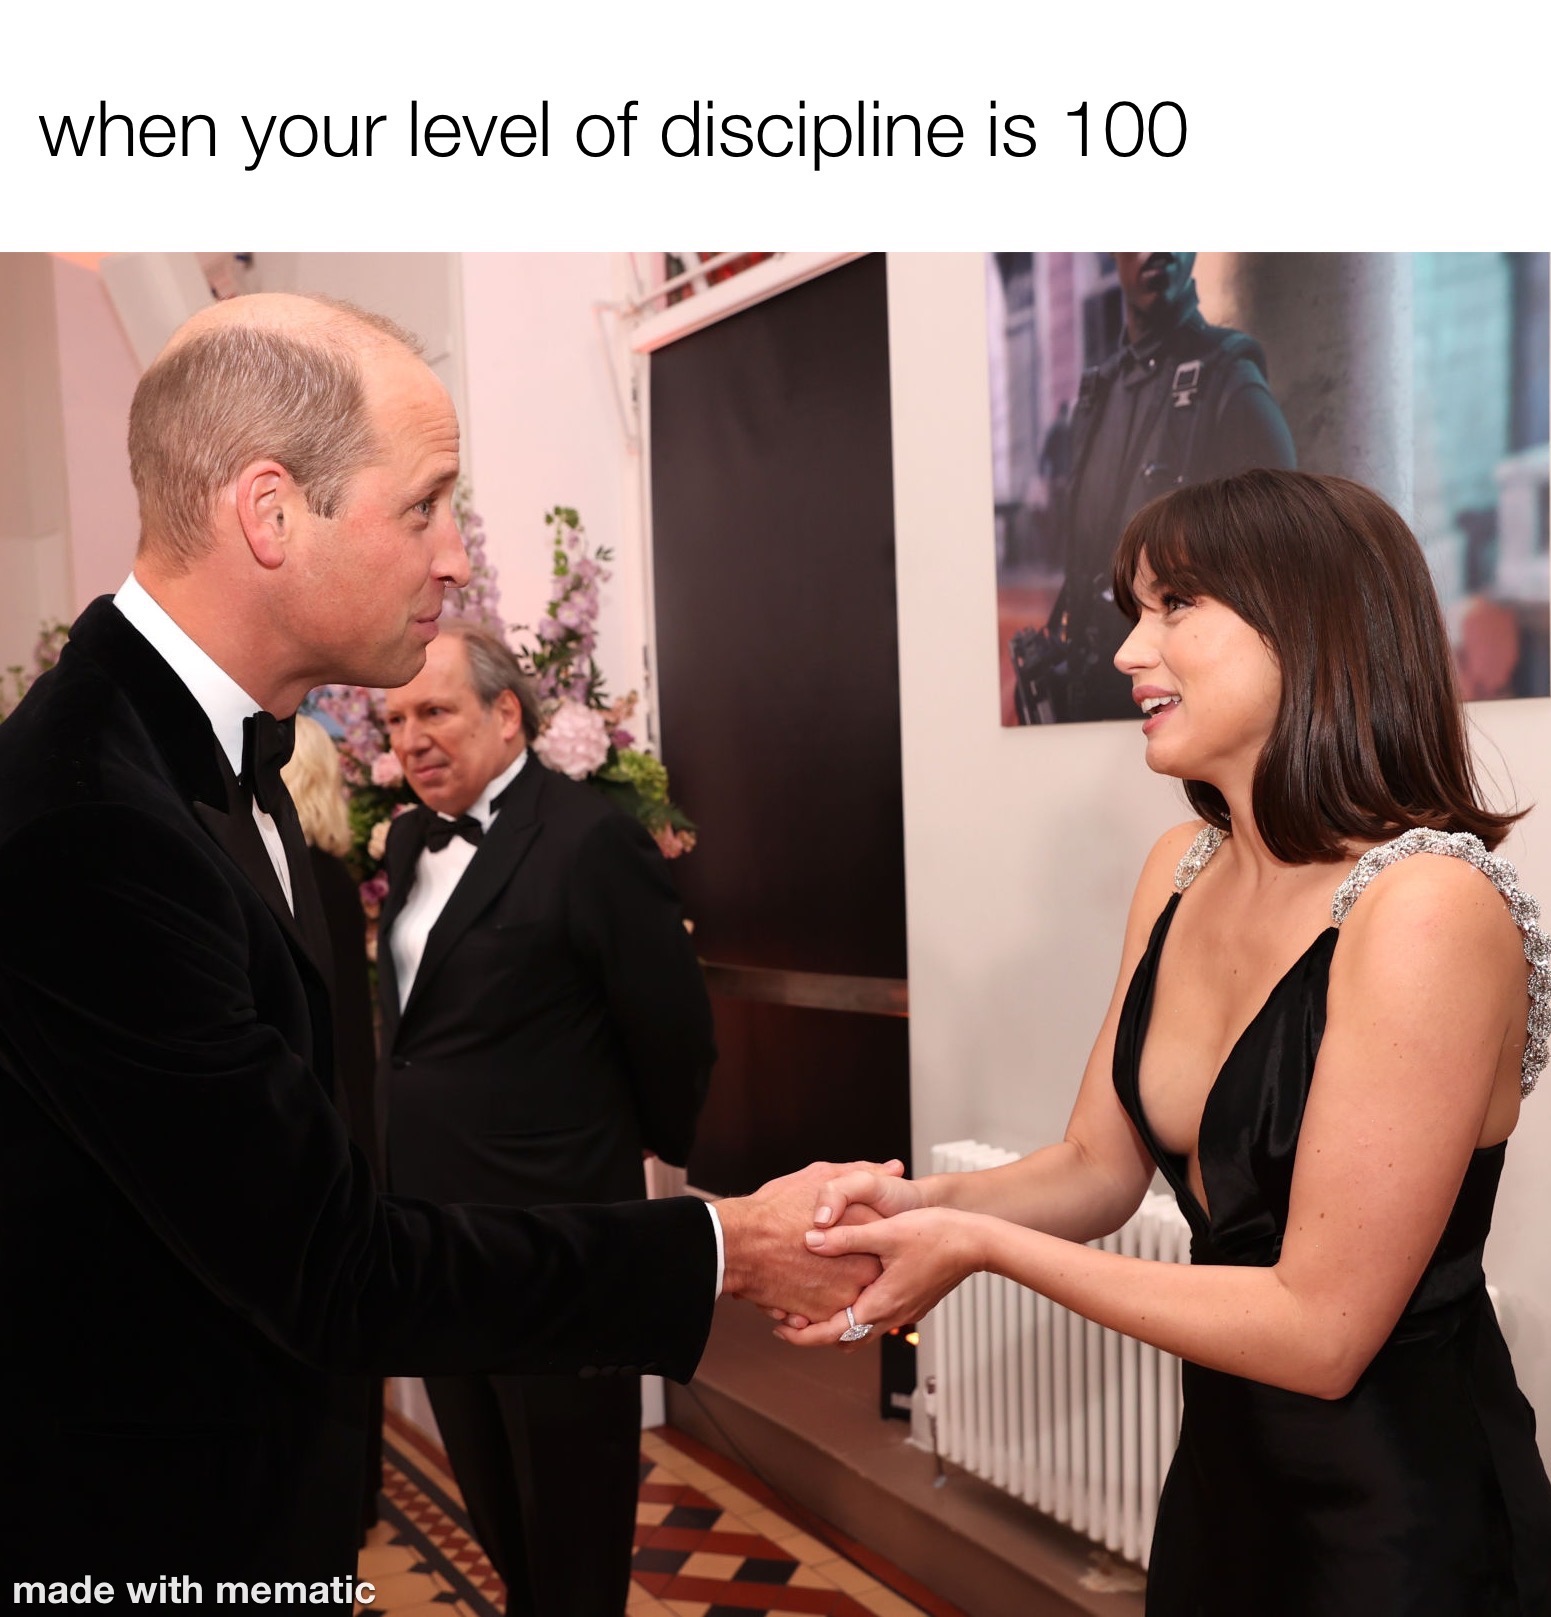 funny memes - prince william bond girl - when your level of discipline is 100 made with mematic www